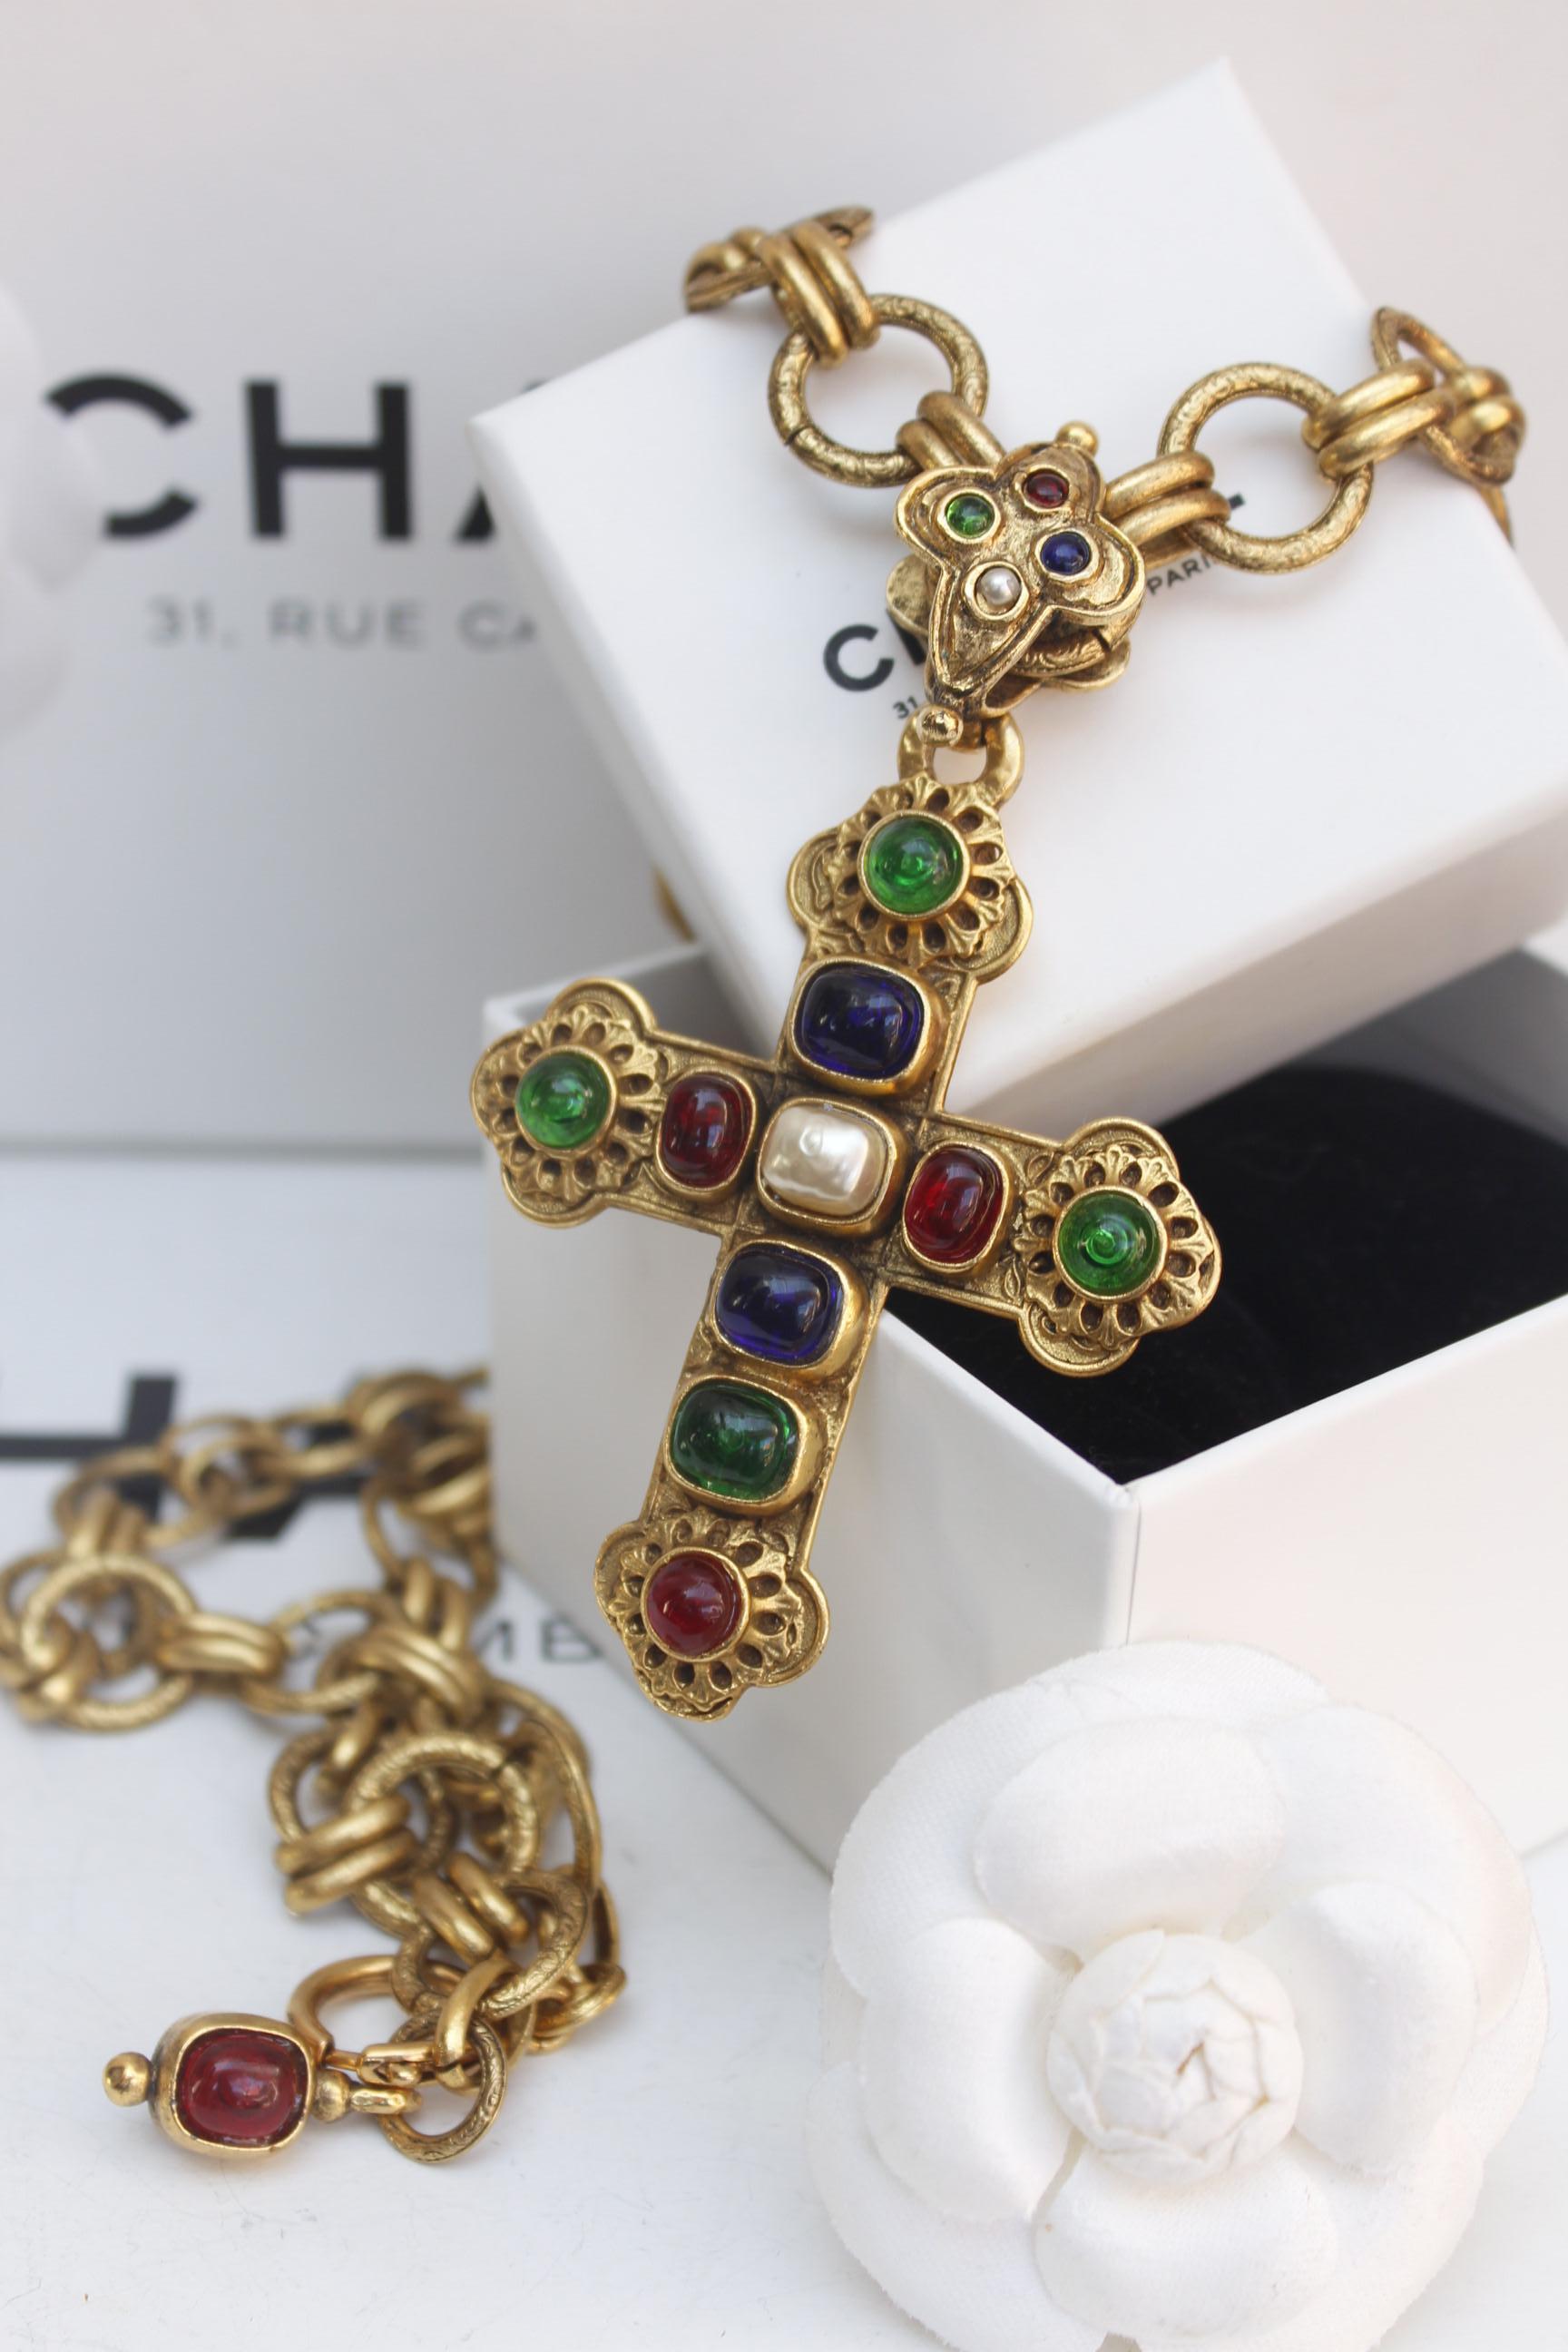 CHANEL (Made in France) 

Beautiful long necklace composed of a large stylized gilted metal chain and adorned by a jewel cross pendant, decorated with pearly and glass paste cabochons in blue, red and green colors.

Signed on a plate at the back of